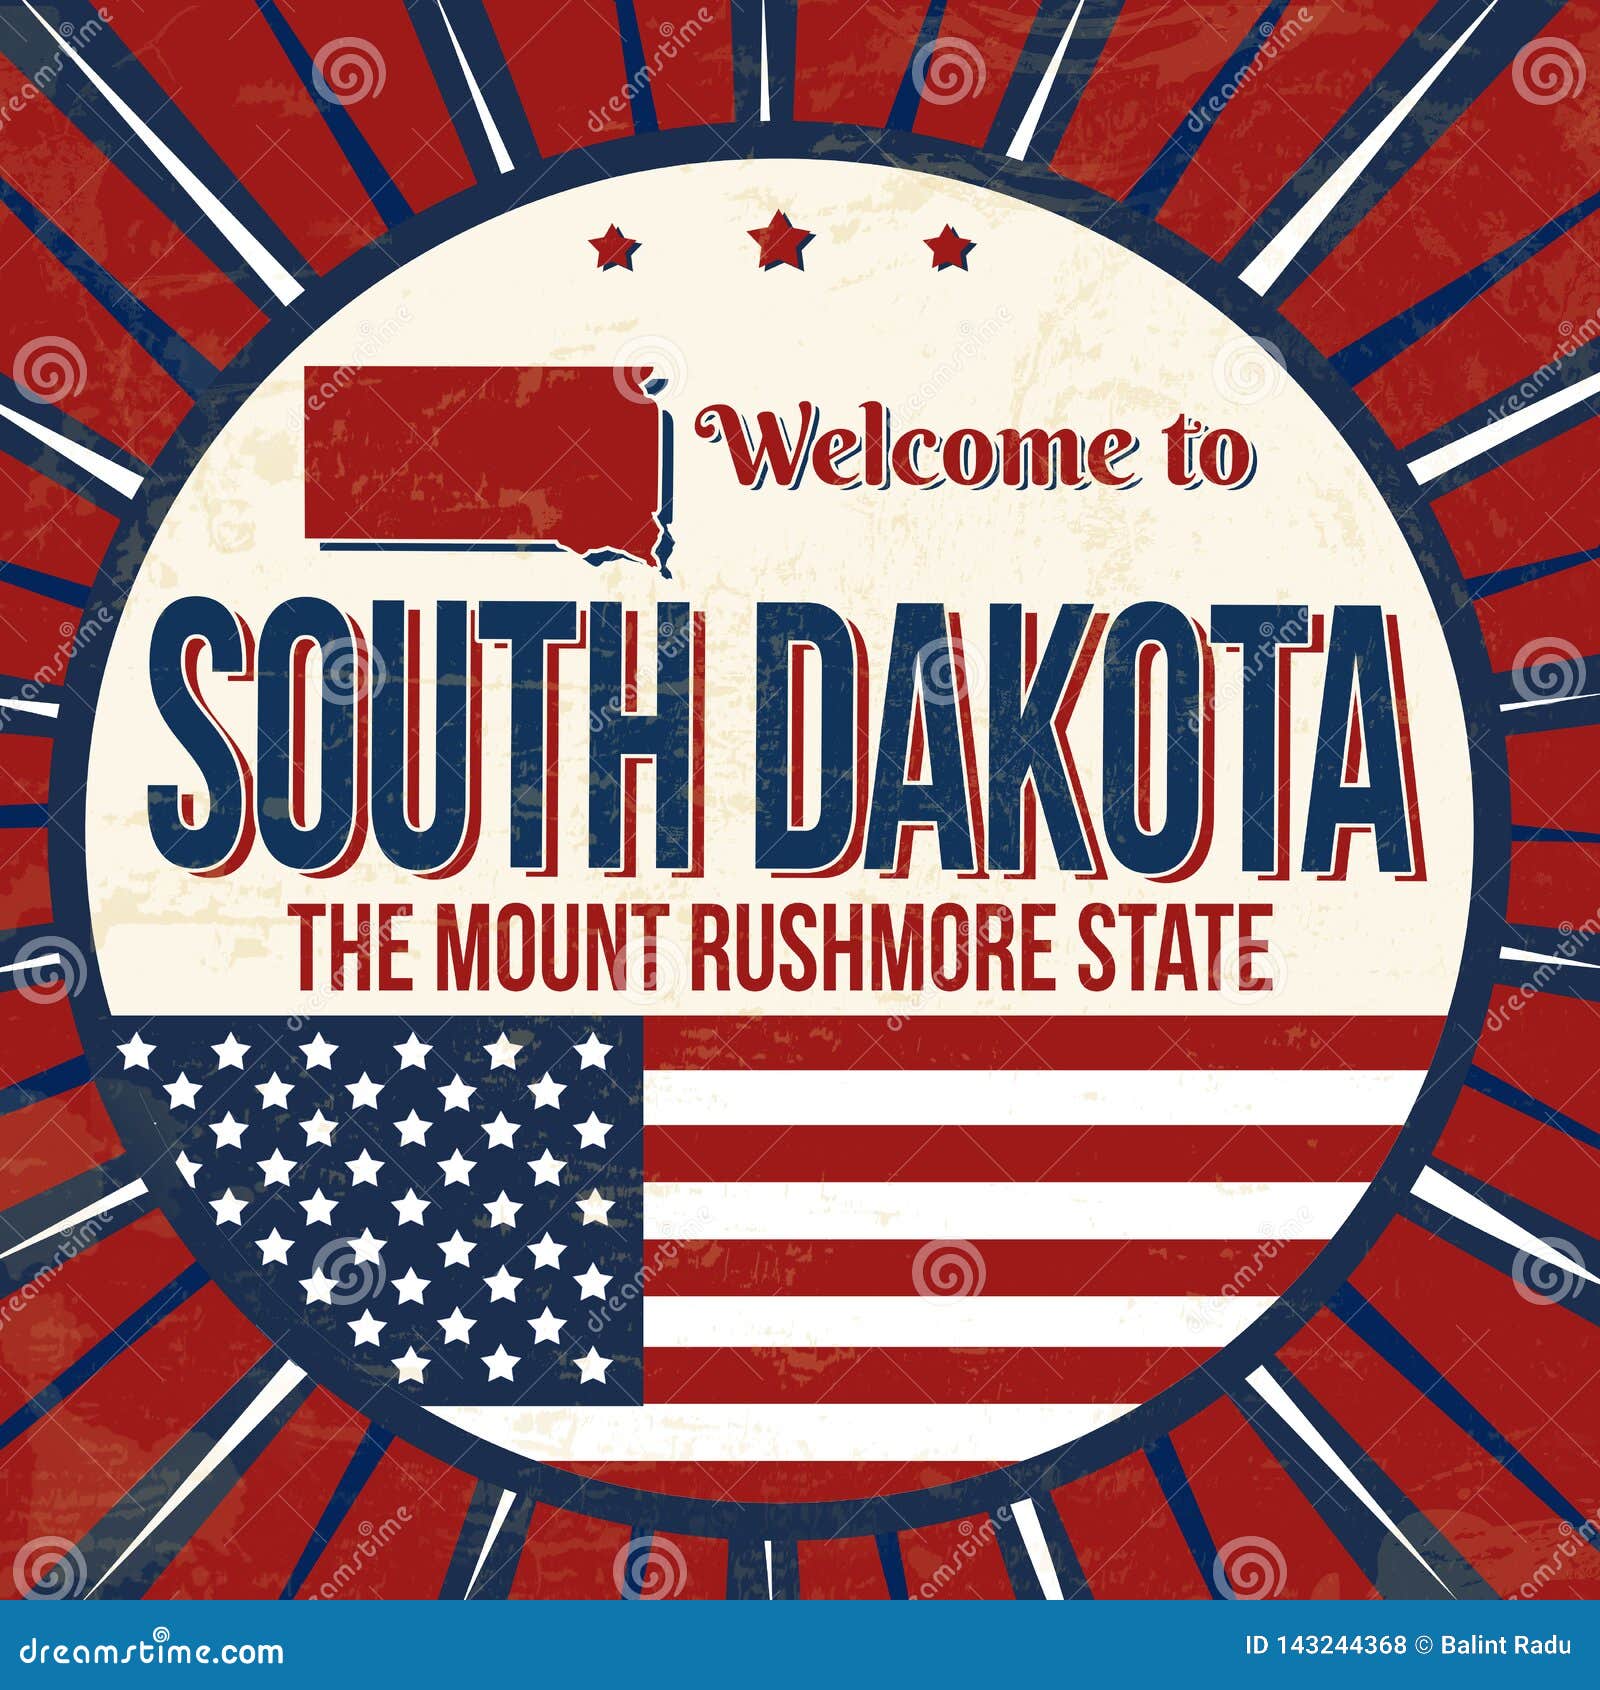 Welcome To South Dakota Vintage Grunge Poster Stock Vector